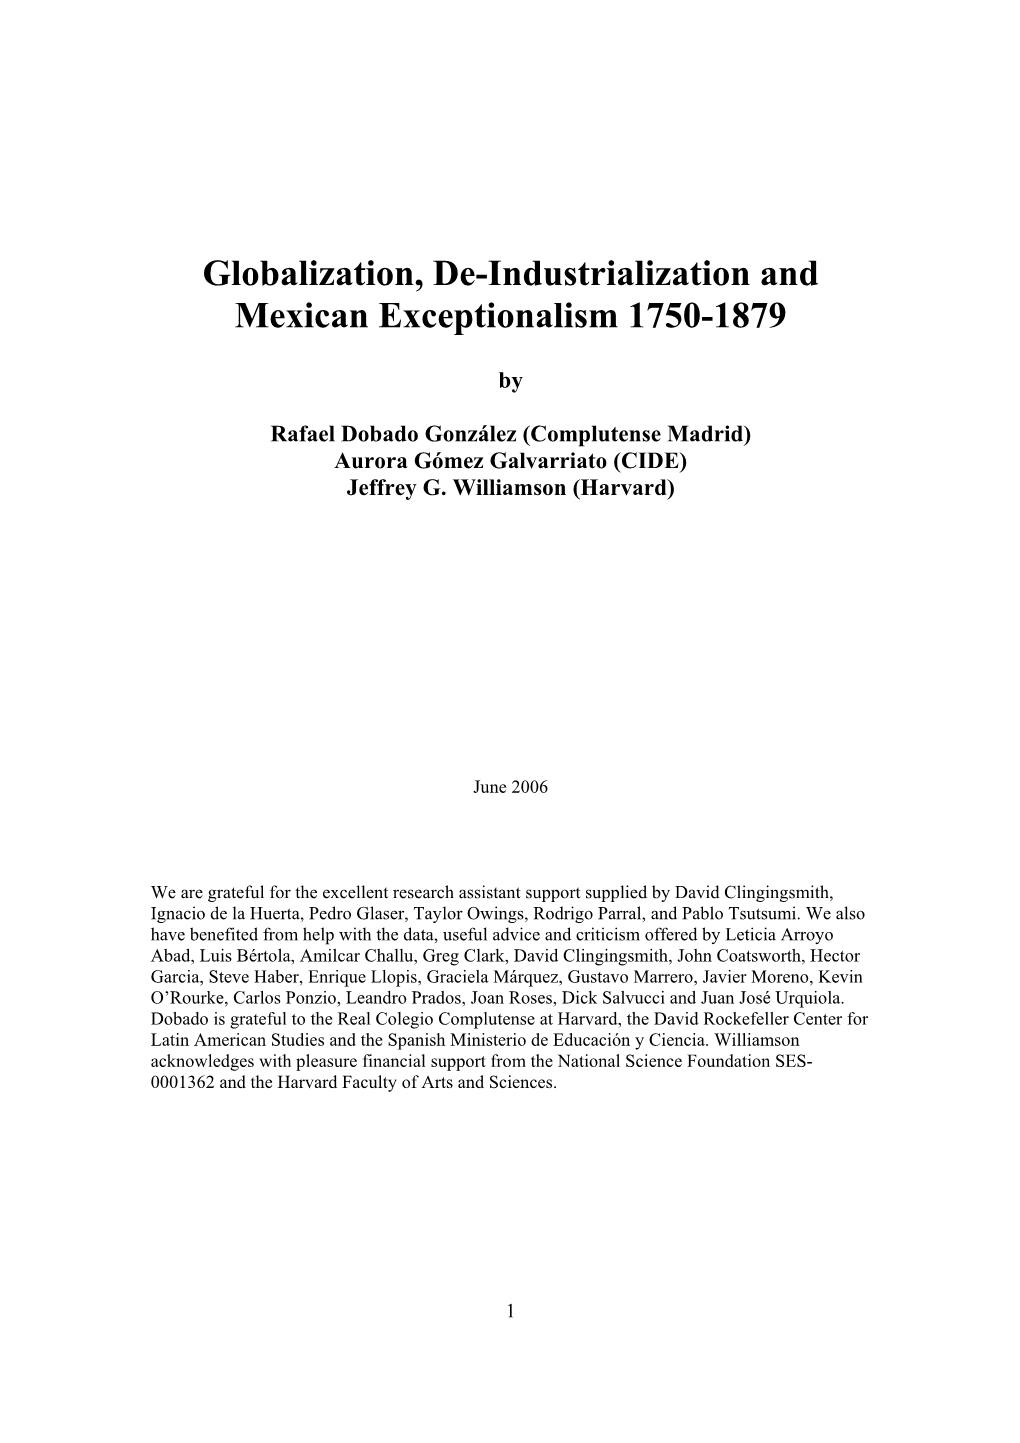 Globalization, De-Industrialization and Mexican Exceptionalism 1750-1879